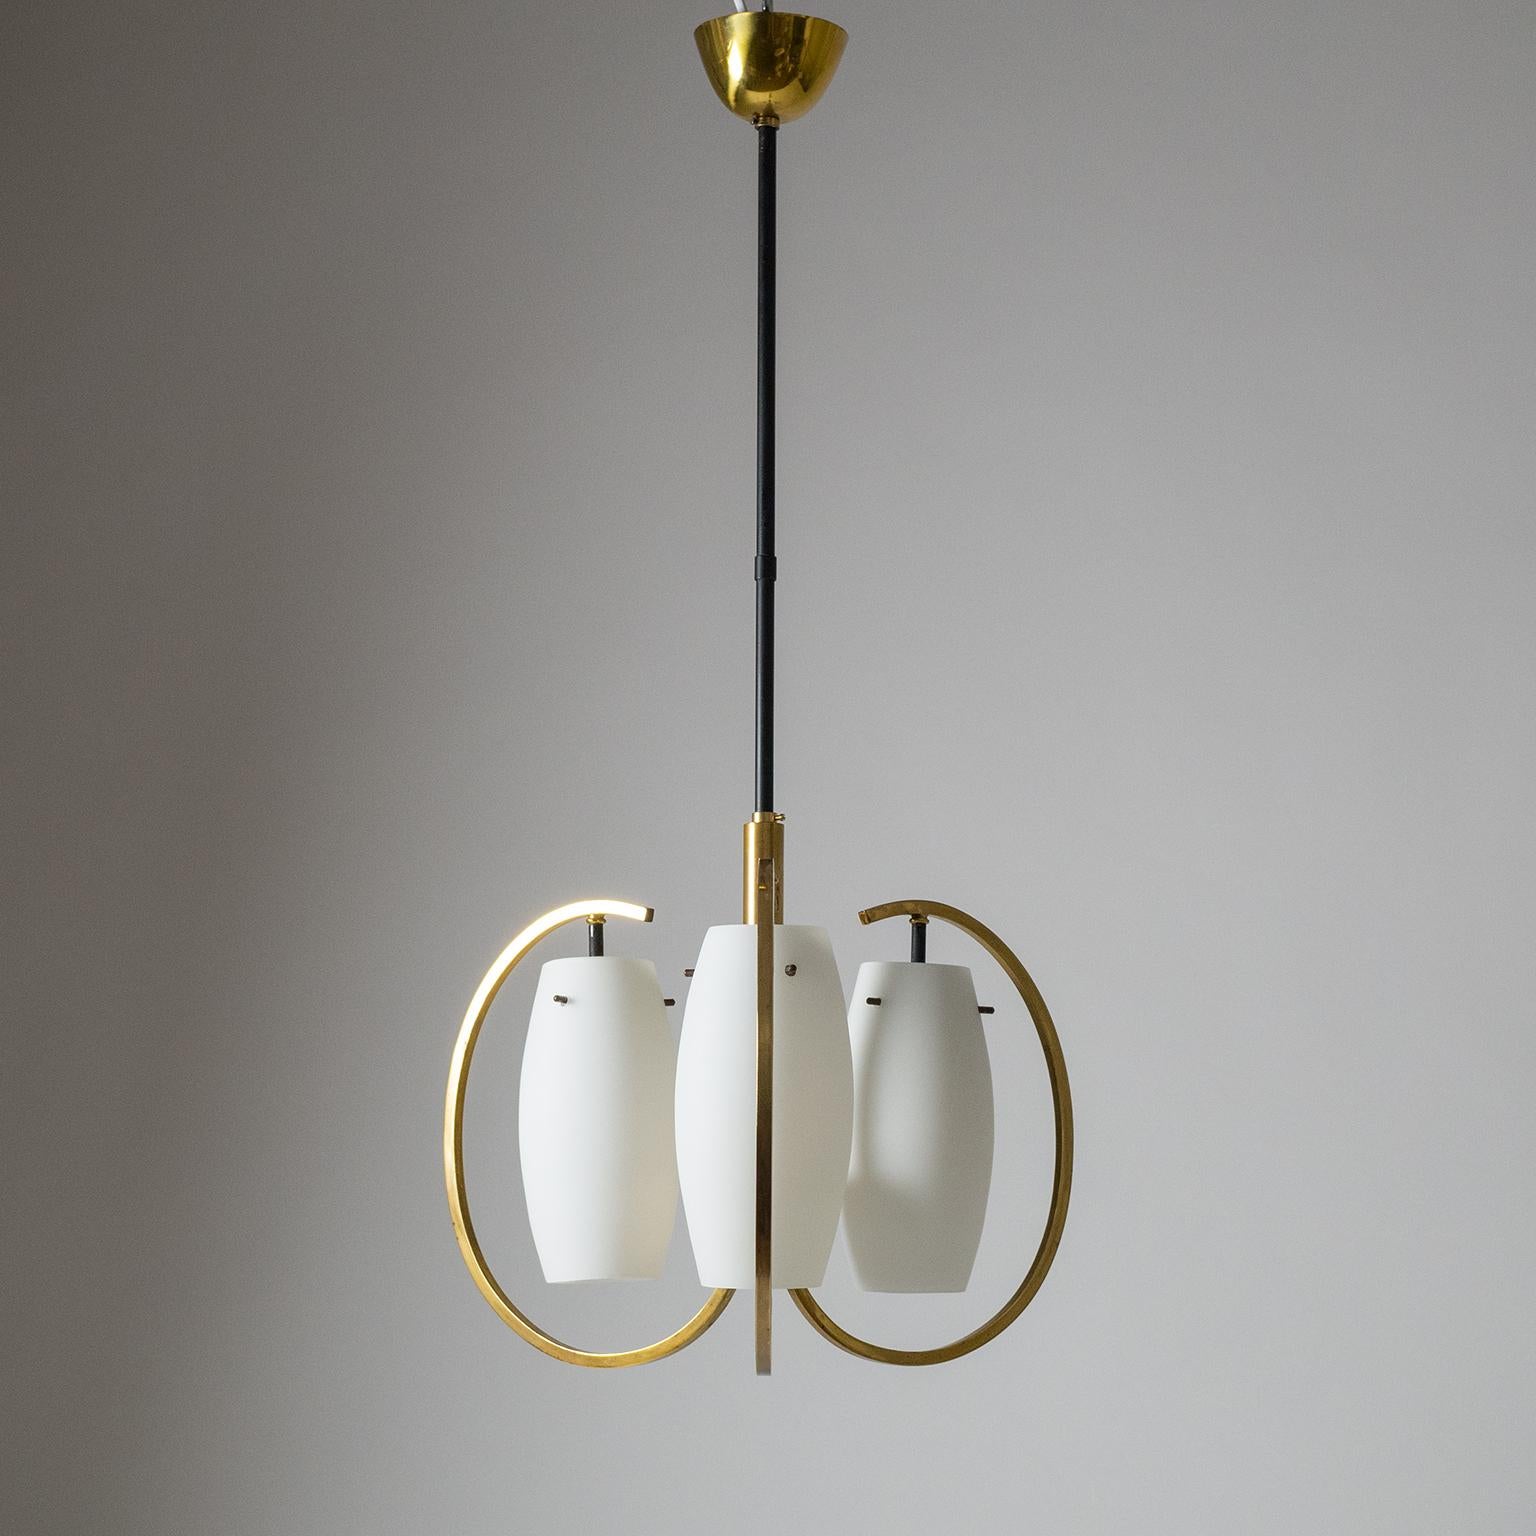 Modernist 1950s Italian three-arm chandelier in Classic midcentury color scheme of brass, black and white. Since the stem is composed of two parts this can be easily configured for low ceilings with a chandelier height of approximate 17 inches/44